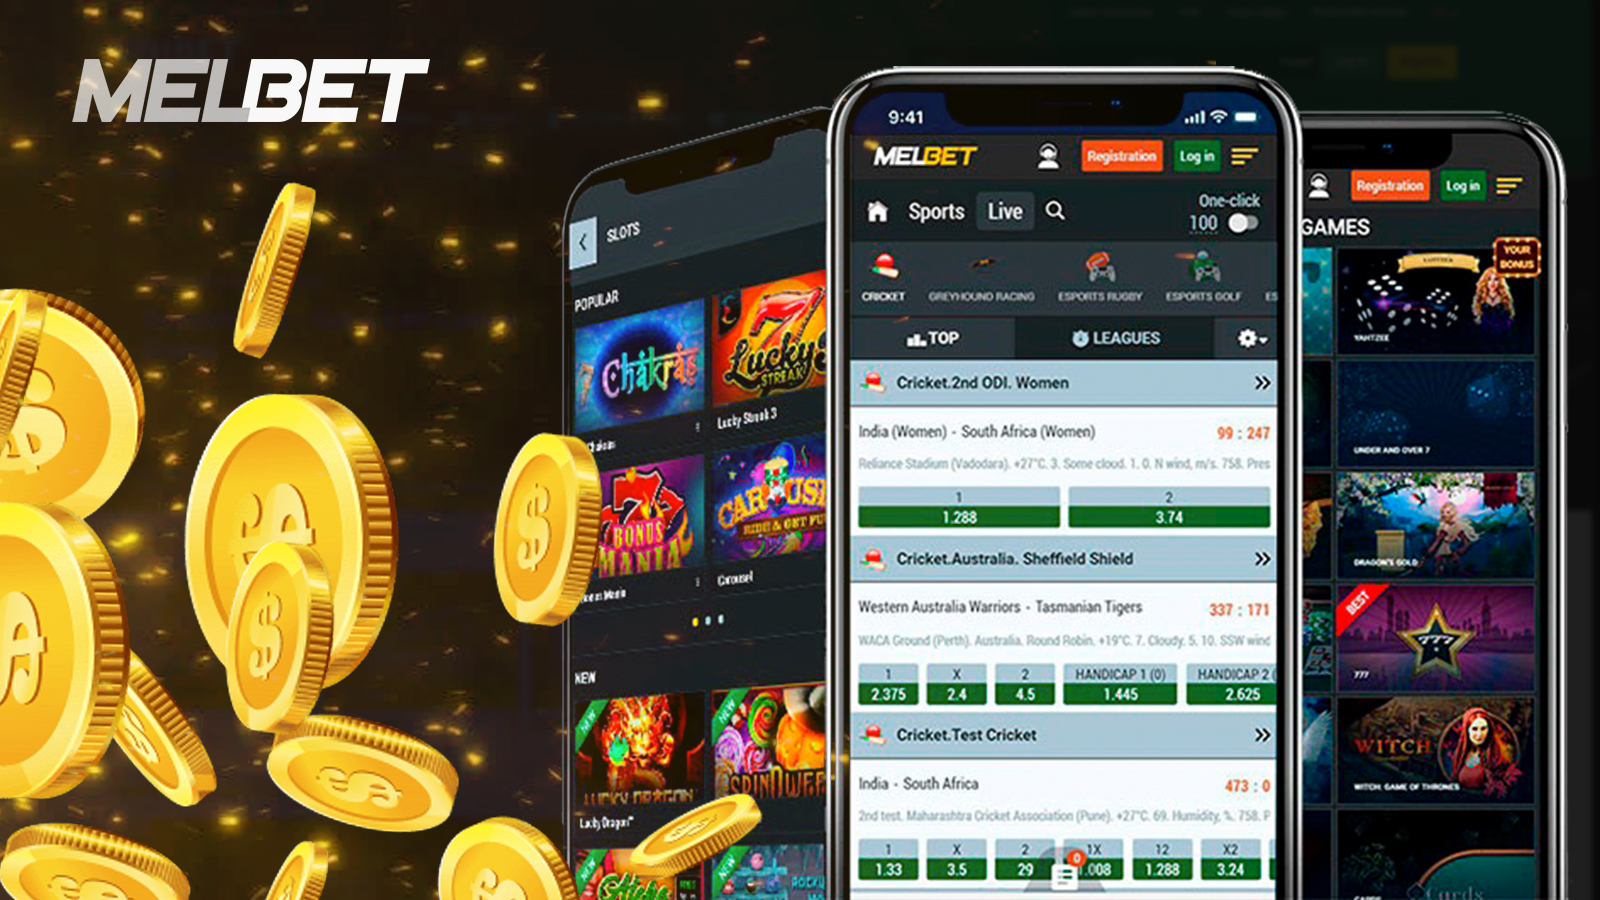 Download and install the app and play casino games whenever you want.